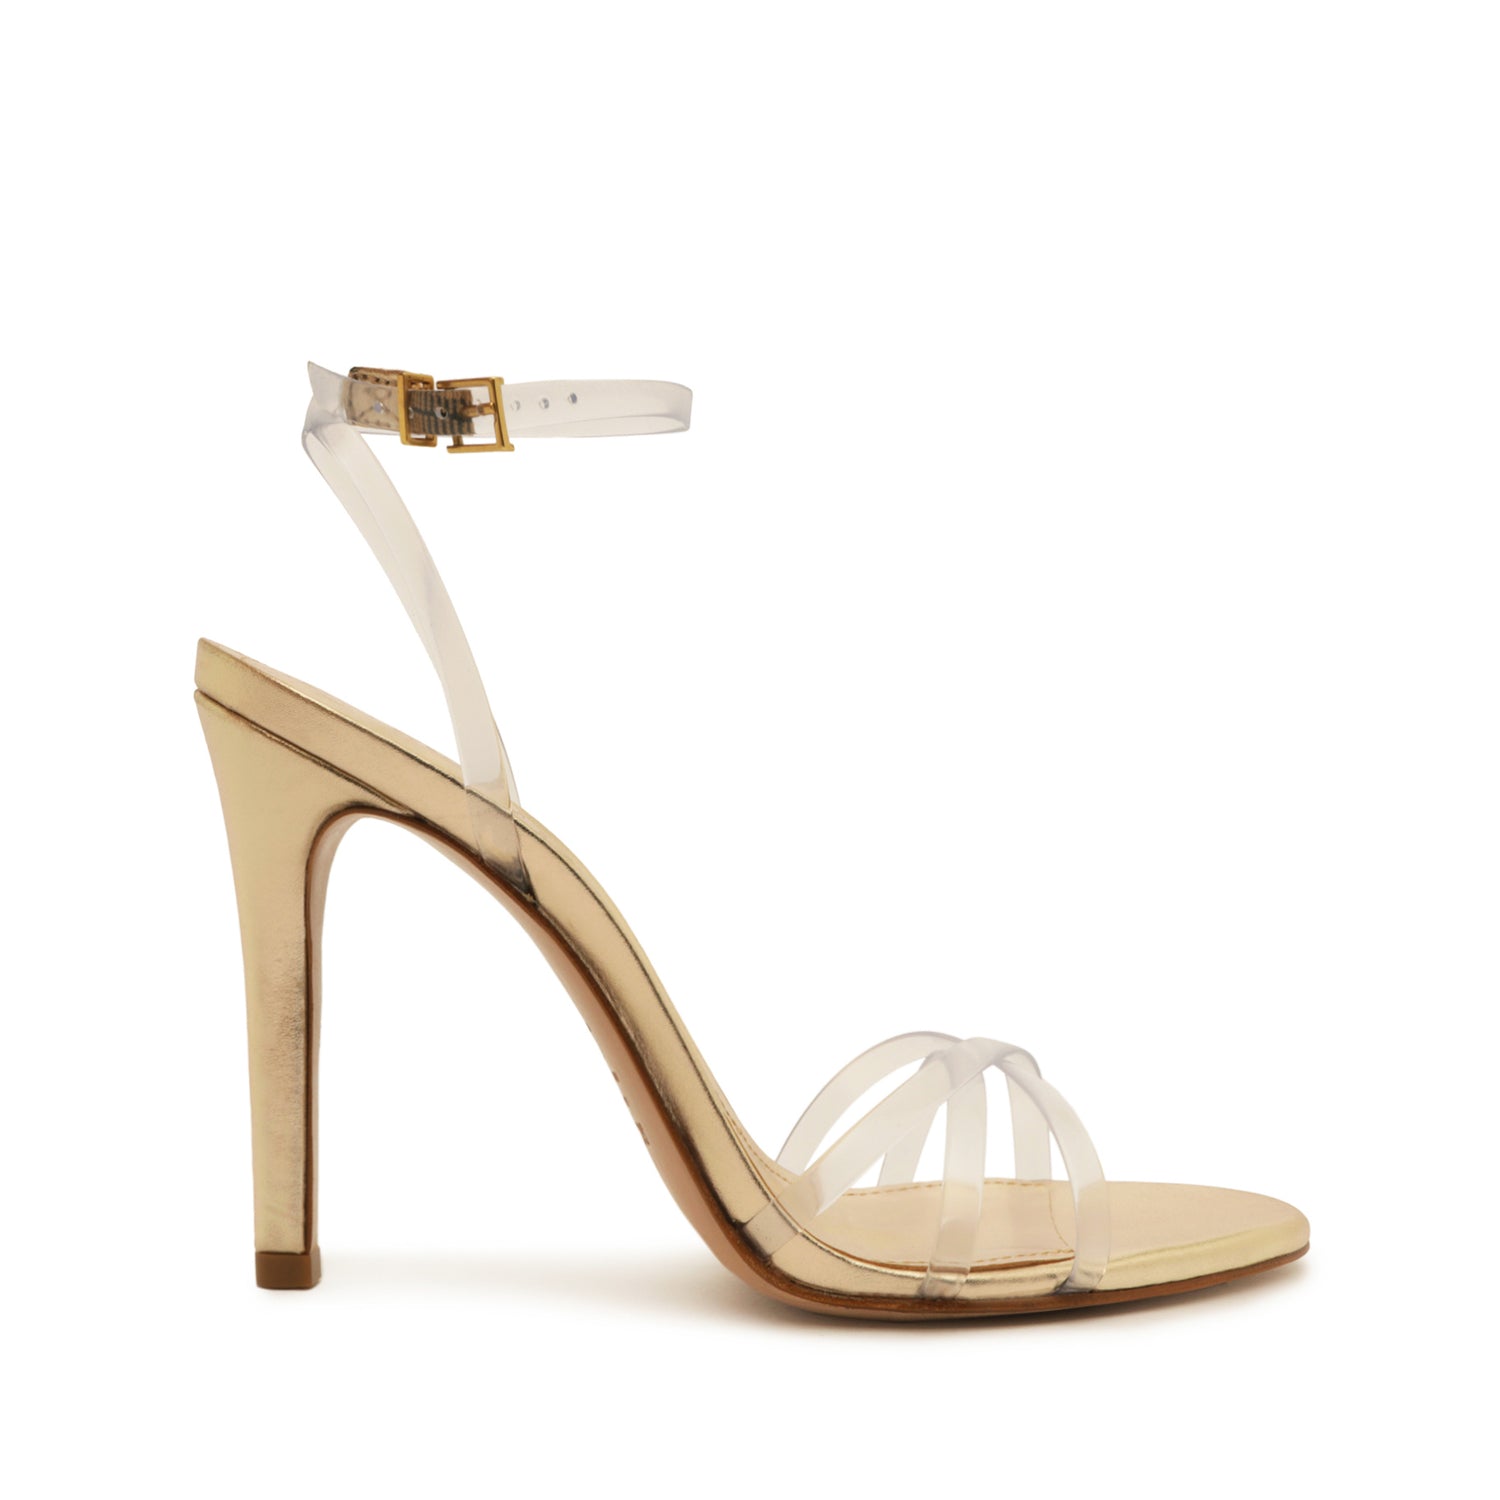 Amelia Leather Sandal Sandals High Summer 23 5 Gold Leather - Schutz Shoes